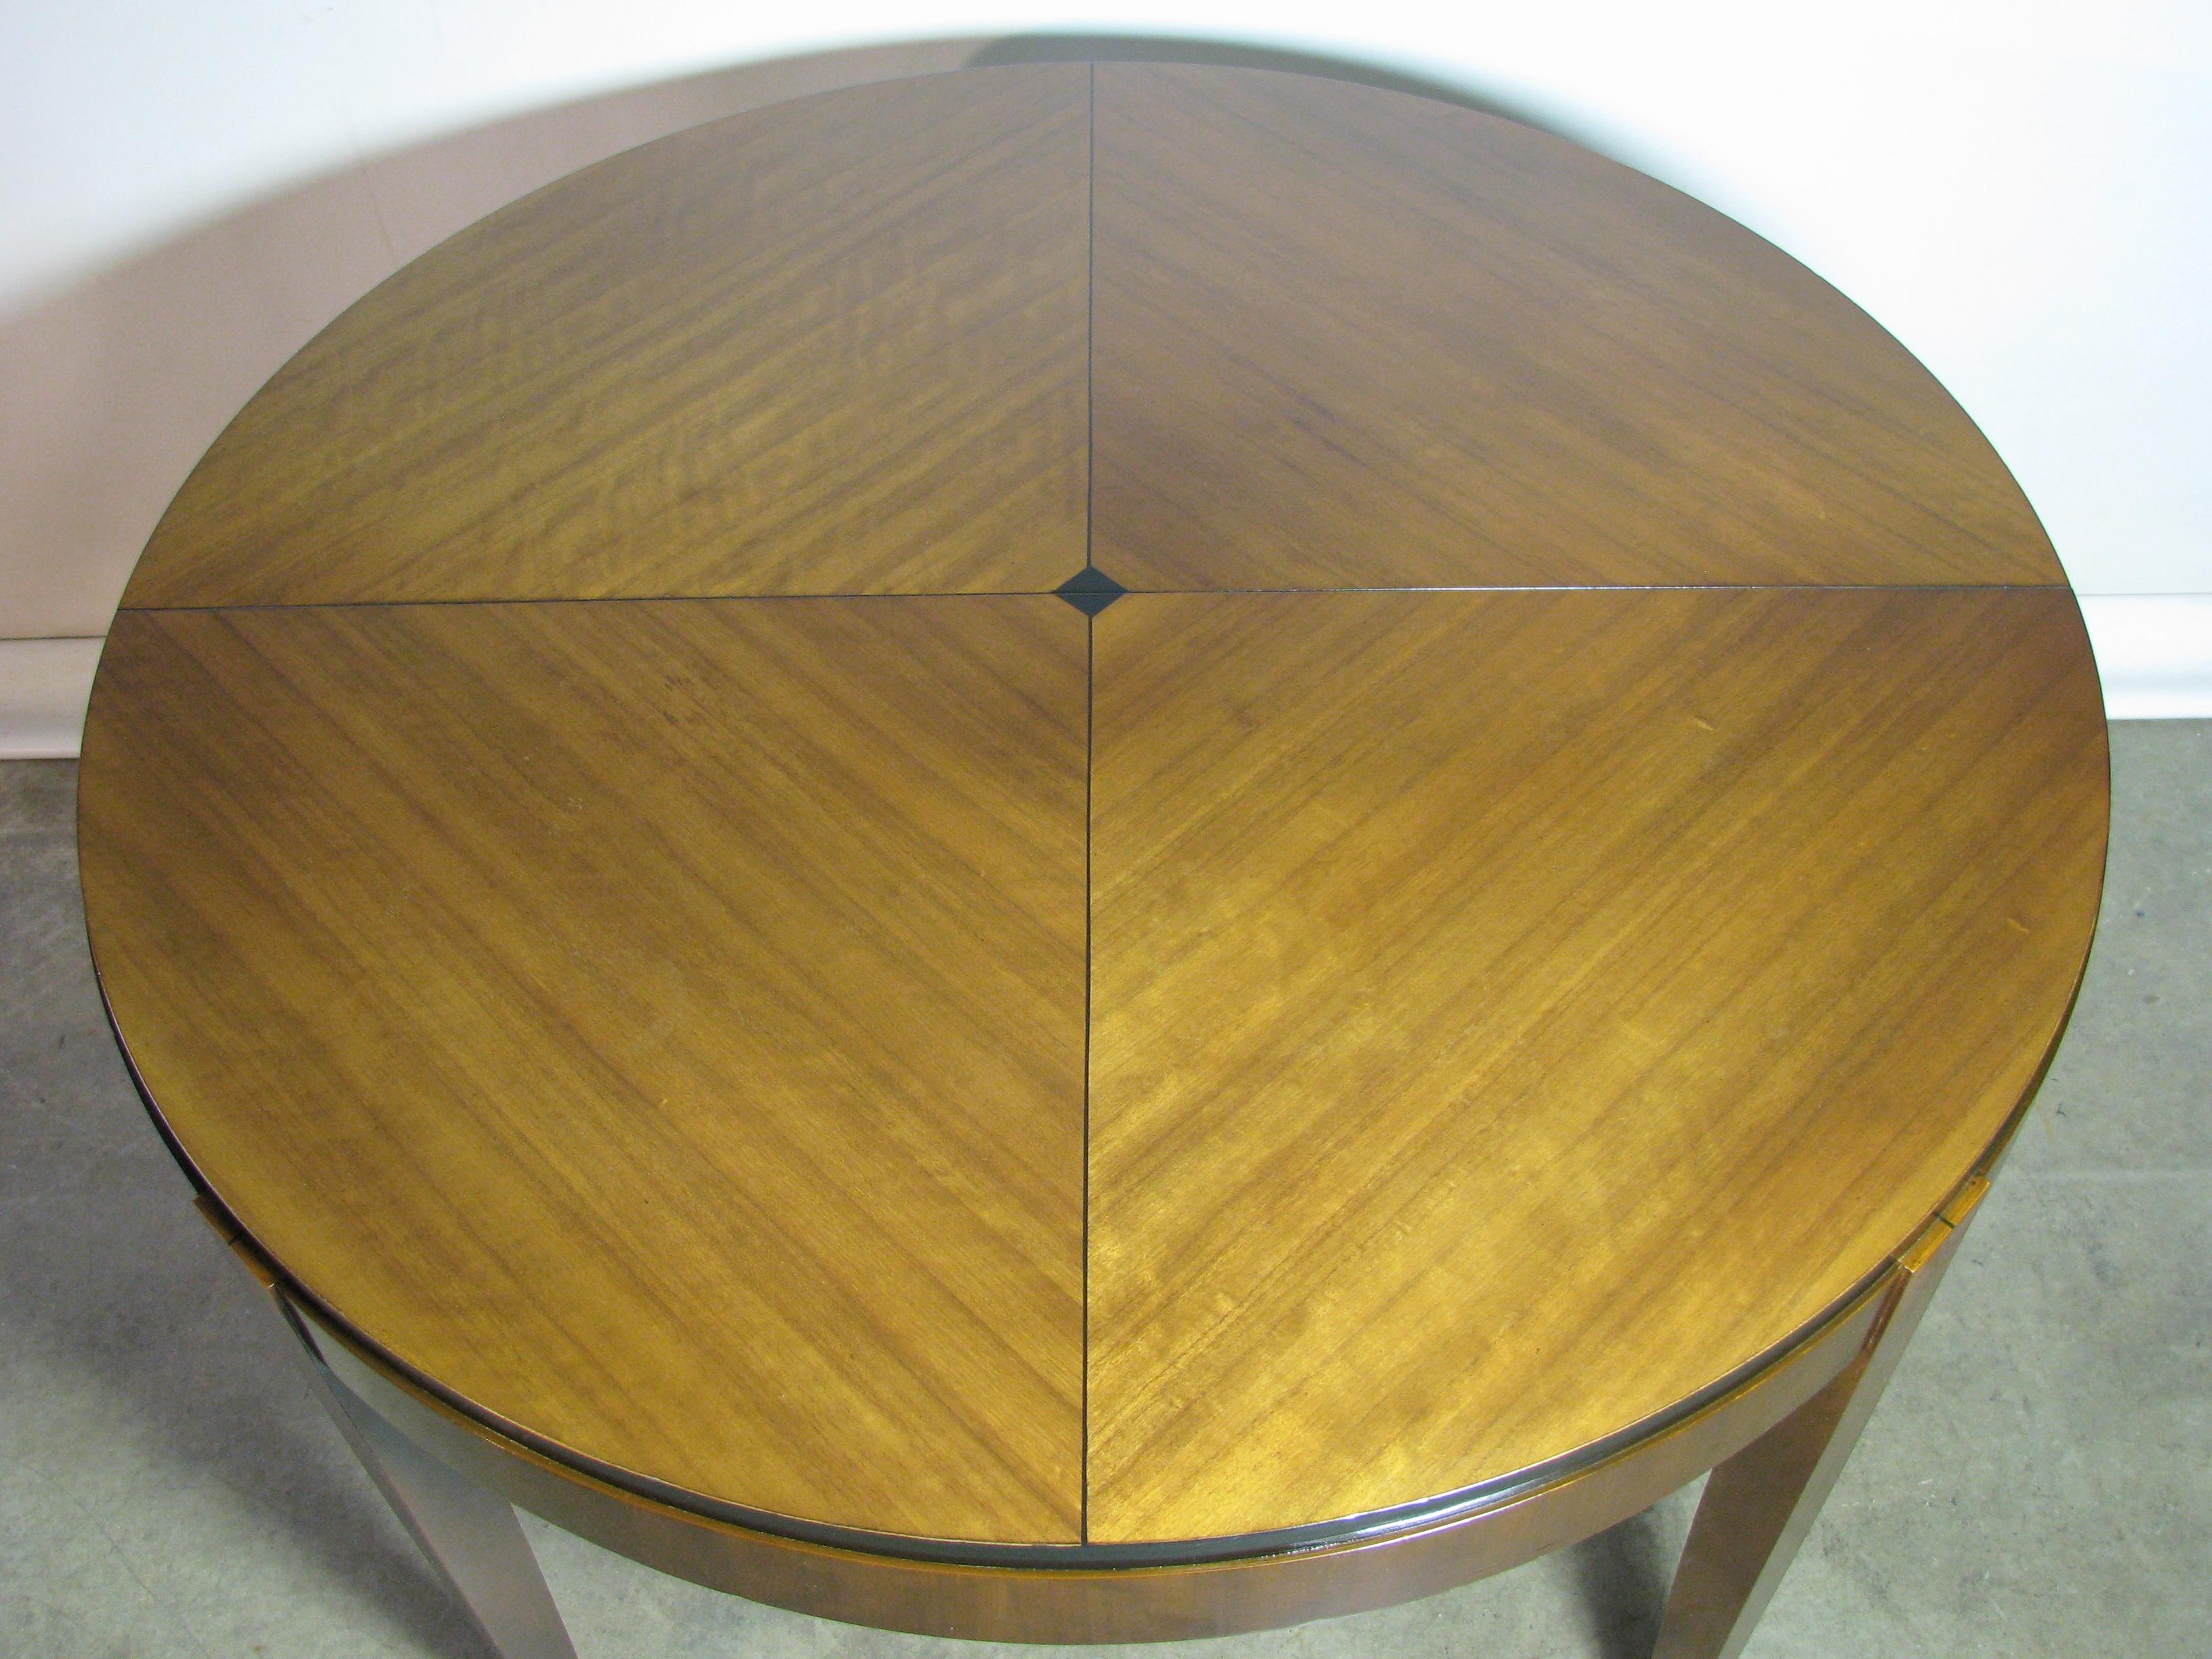 Spectacular vintage Mastercraft dining table in the Postmodern/Art Deco style. Beautifully figured veneers create an angled pattern on the circular top, centered around an ebonized diamond. The skirt of the table is vertical, with a stepped back